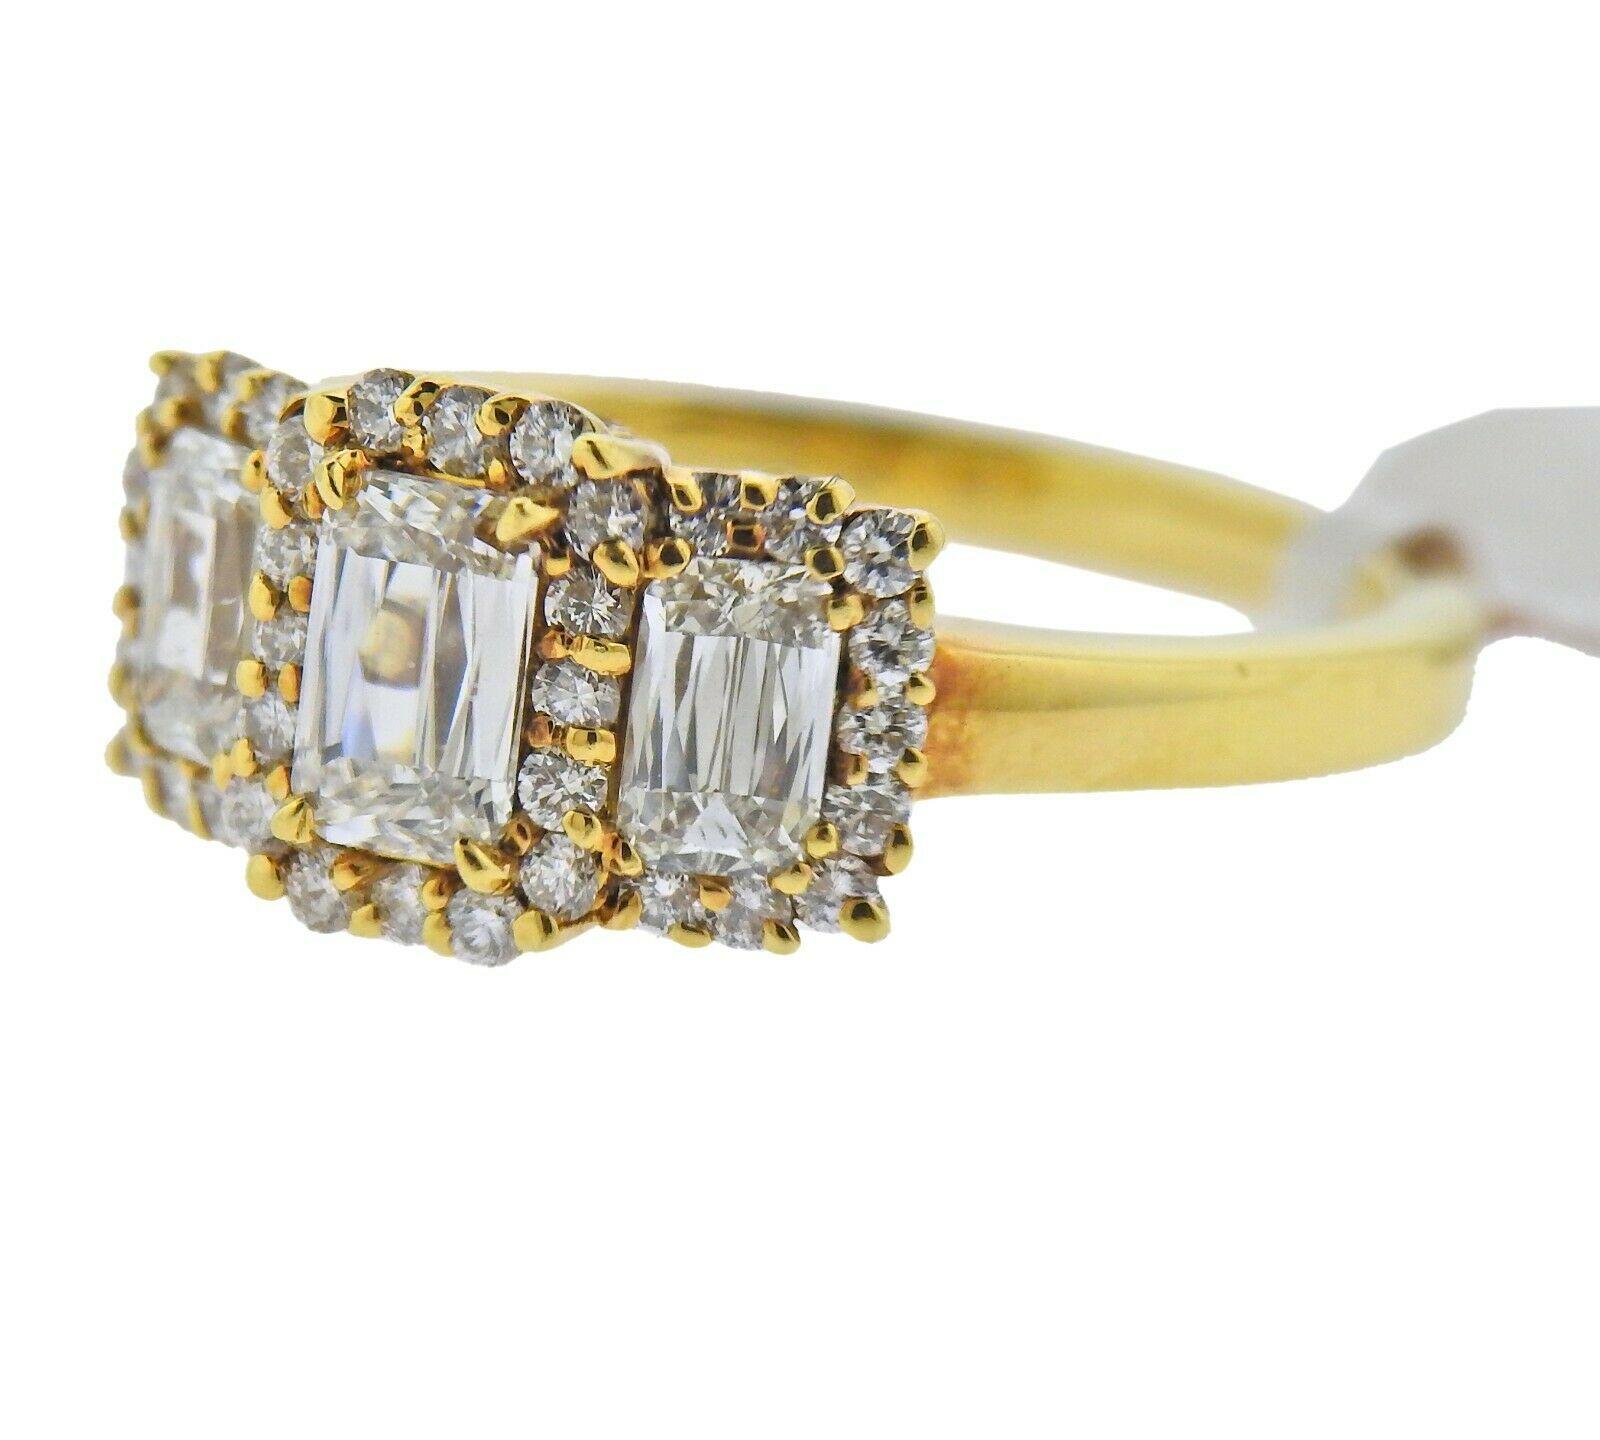 18k yellow gold ring by Ashoka. Set with a total of 0.88ctw of Si1/H diamonds. Ring size - 6.75, ring top - 9mm x 15mm. Marked -  18kt,  Ashoka, BG.. Weight - 5 grams. Brand new store sample, retail $7400
